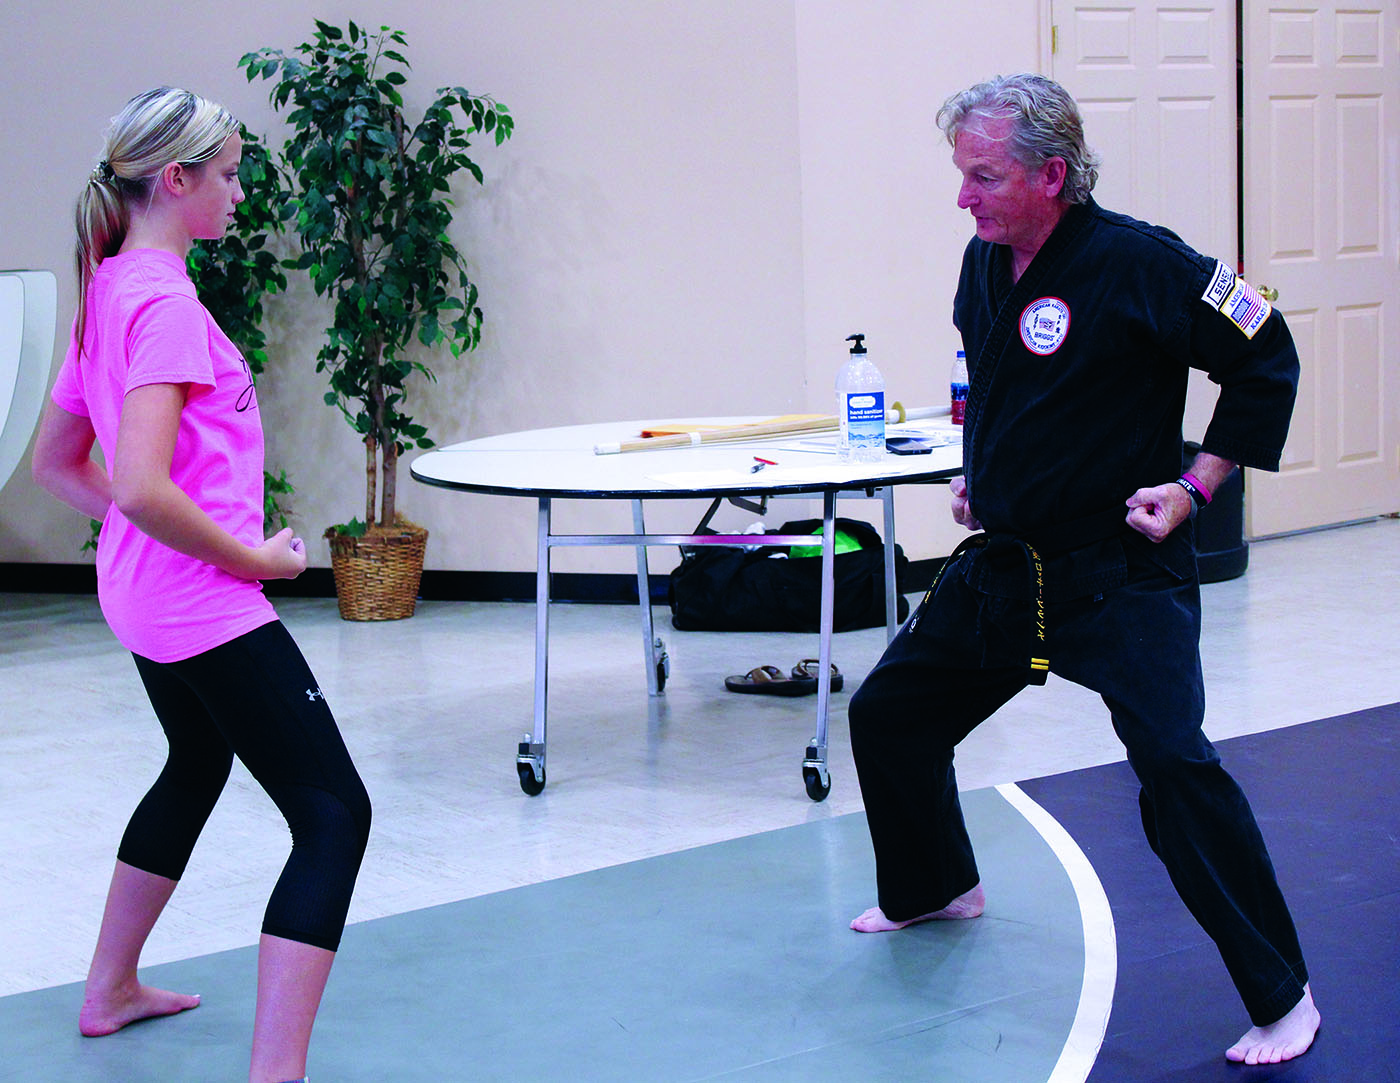 Spruce Pine First Baptist Church Pastor and Karate Instructor Rocky Branch demonstrates proper technique as Kayleigh Hollifield watches and tries her best to replicate it. Branch teaches a karate class at the church twice per week. The class is open to all ages and skill levels. Classes cost $1 and consist of instruction from Branch with help from other experienced martial artists. (MNJ photo/Cory Spiers)